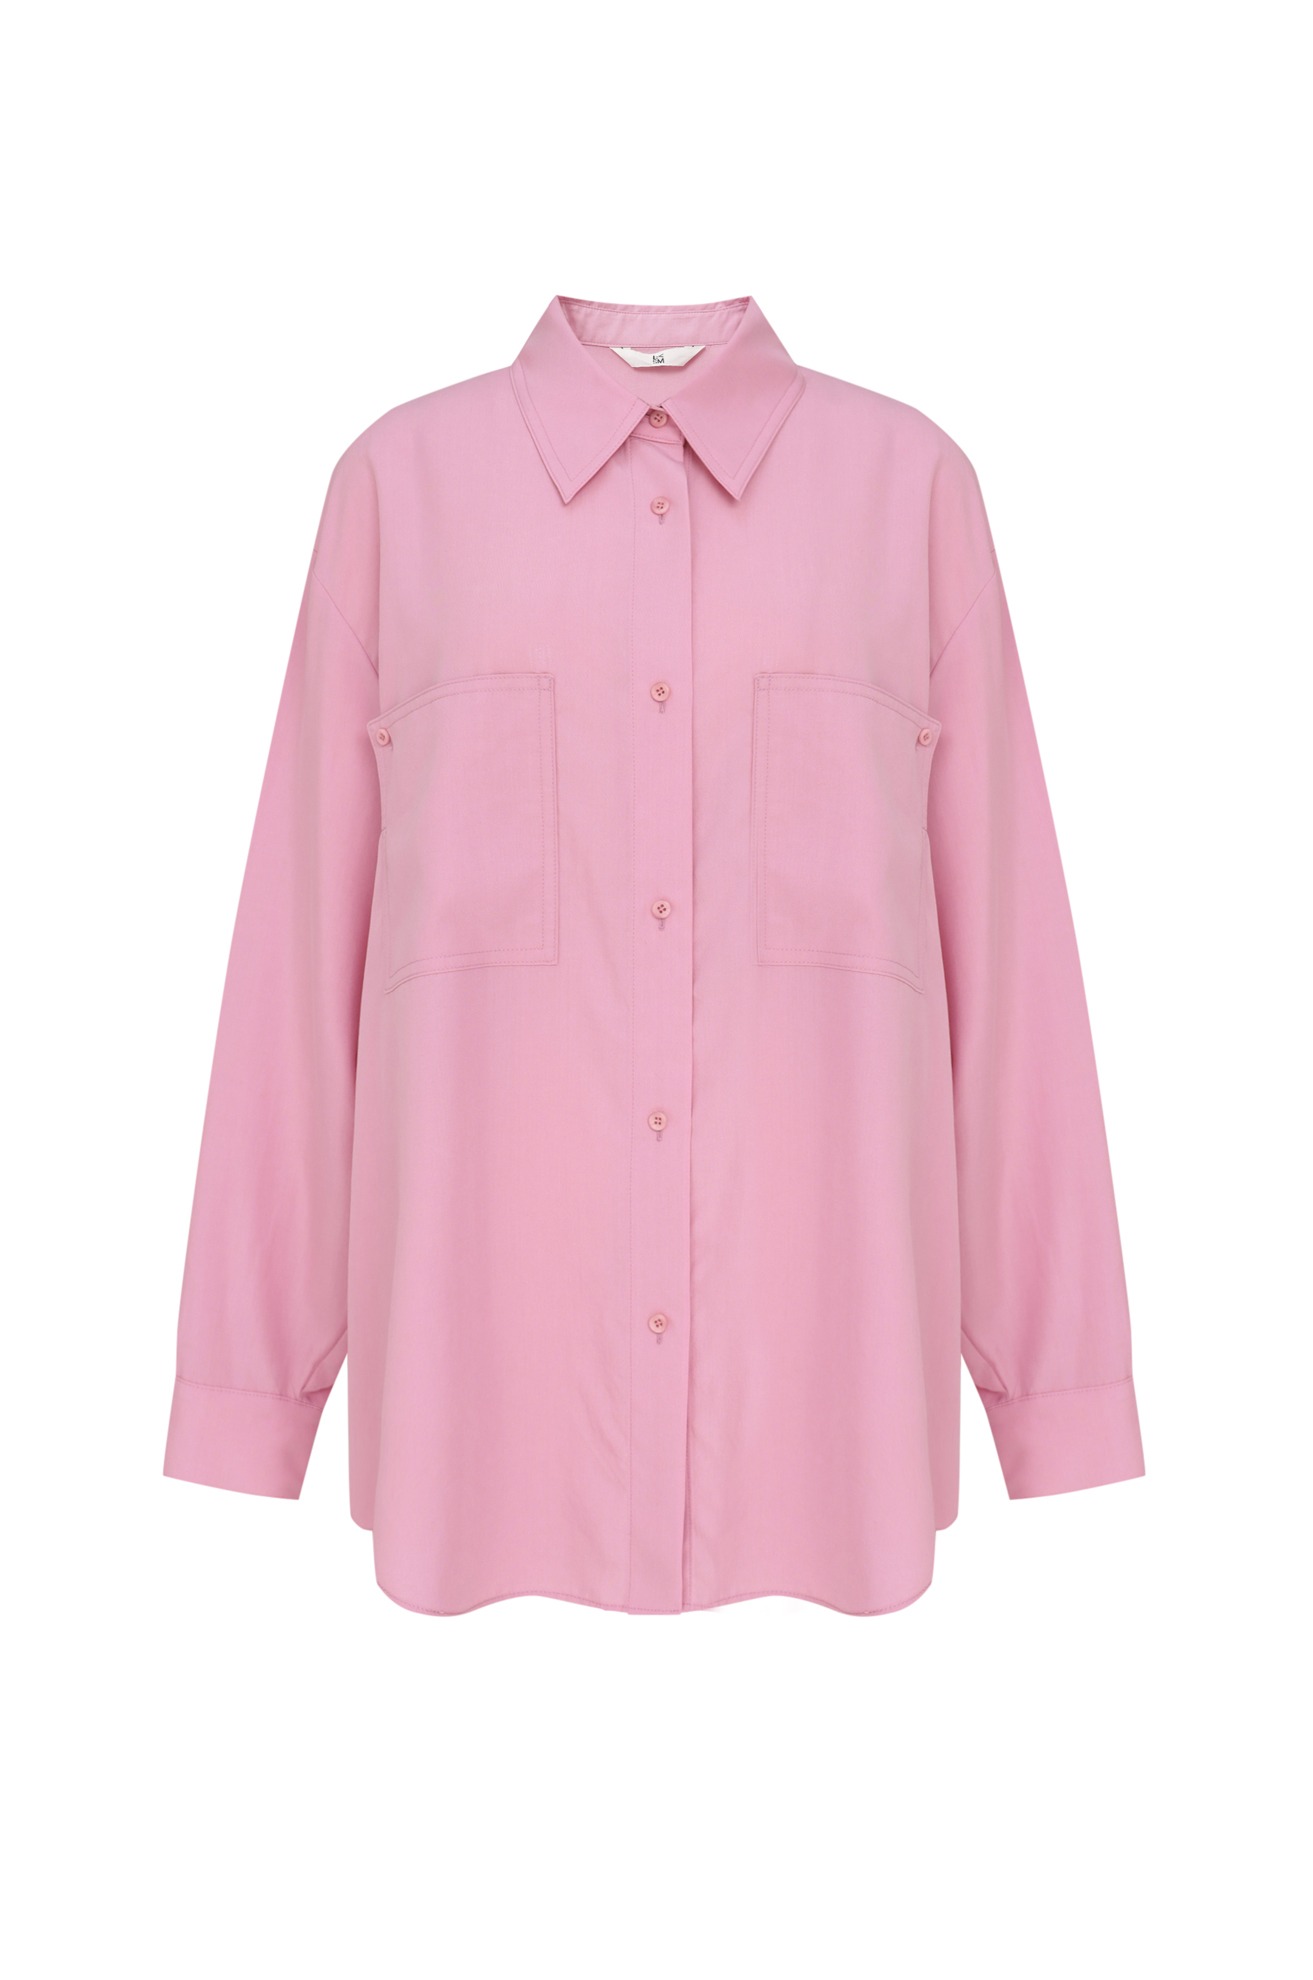 Buttoned Pocket Tencel Shirts  9/5일 순차발송